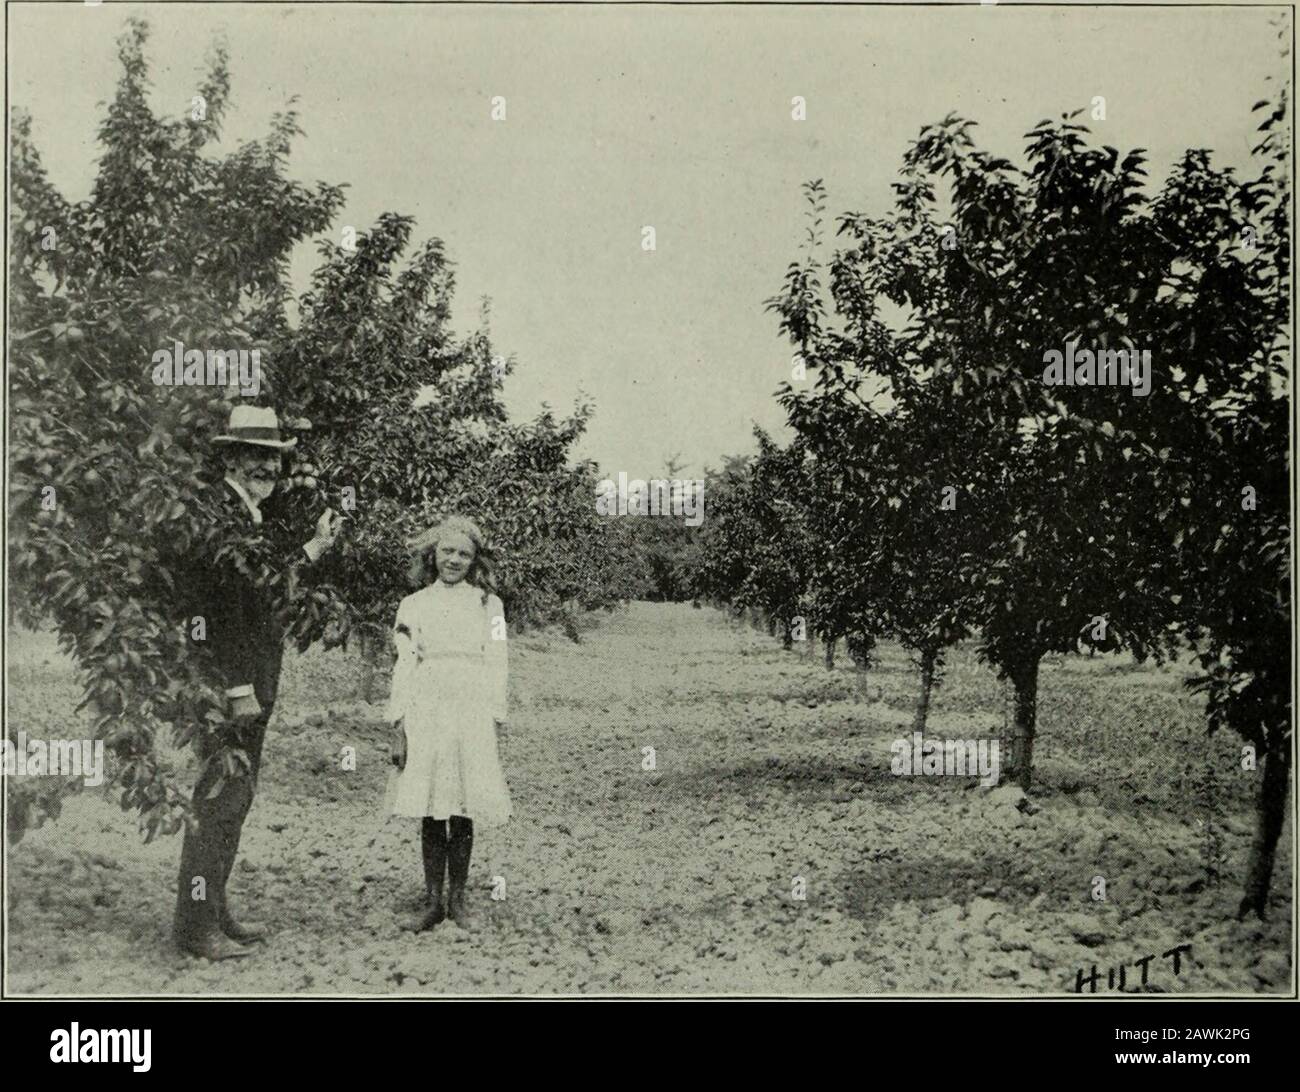 Annual report of the Fruit Growers' Association of Ontario, 1904 . Fruit House ol W. H. Dempsey, Trenton, Ont. Capacity about 3,000 barrels of apples.(Illustrating Prof. Hutts Report, page 87). 61. A well kept Keiffer pear orchard, the property of M. Pettit, Winona, Out mM Huiiif ul G. C. Cdstoii, Craighurst, Ont. [6: Stock Photo